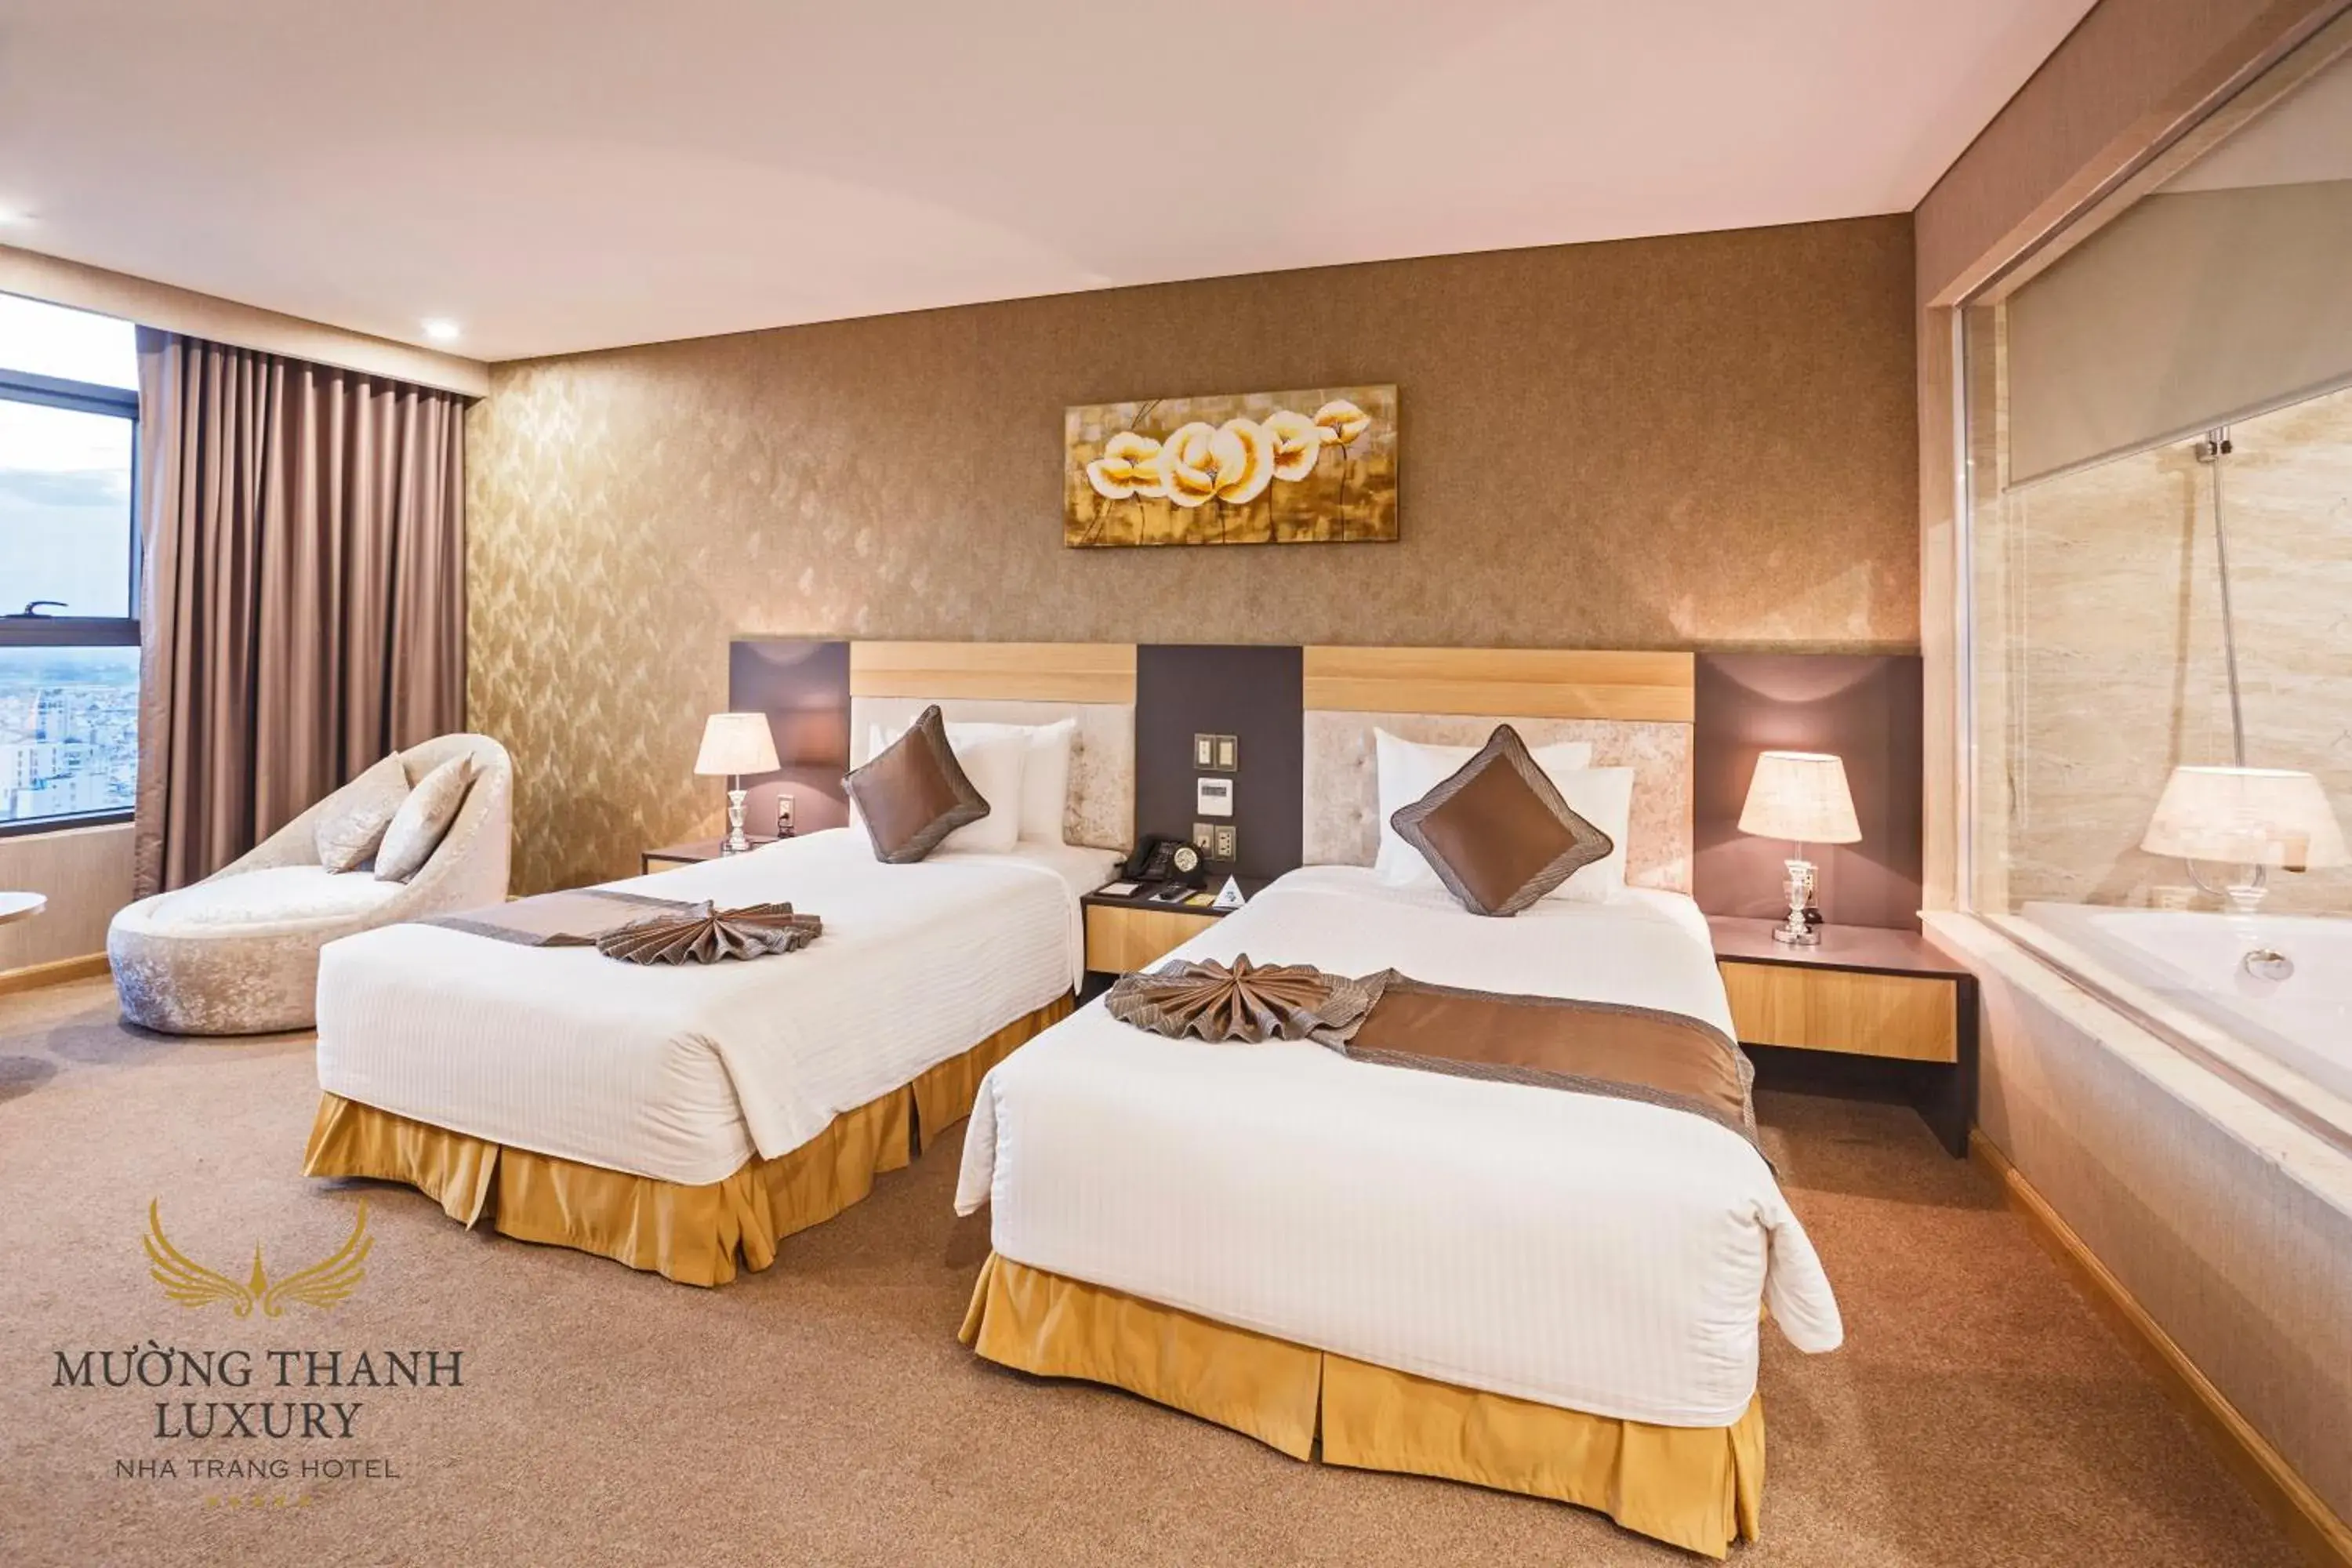 Bed in Muong Thanh Luxury Nha Trang Hotel